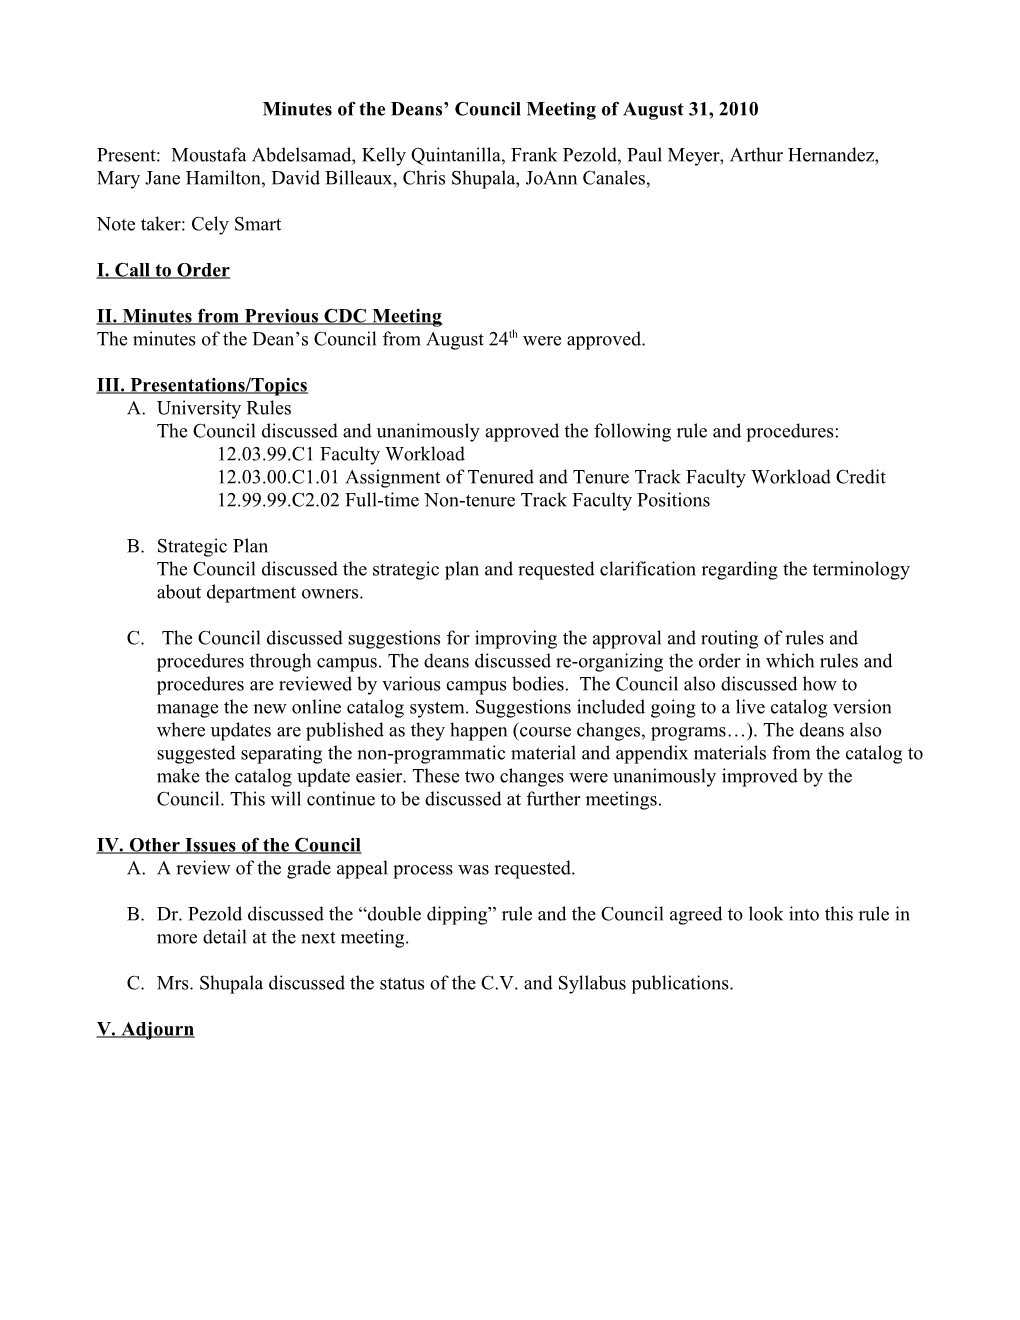 Minutes of the Deans Council Meeting of August 31, 2010